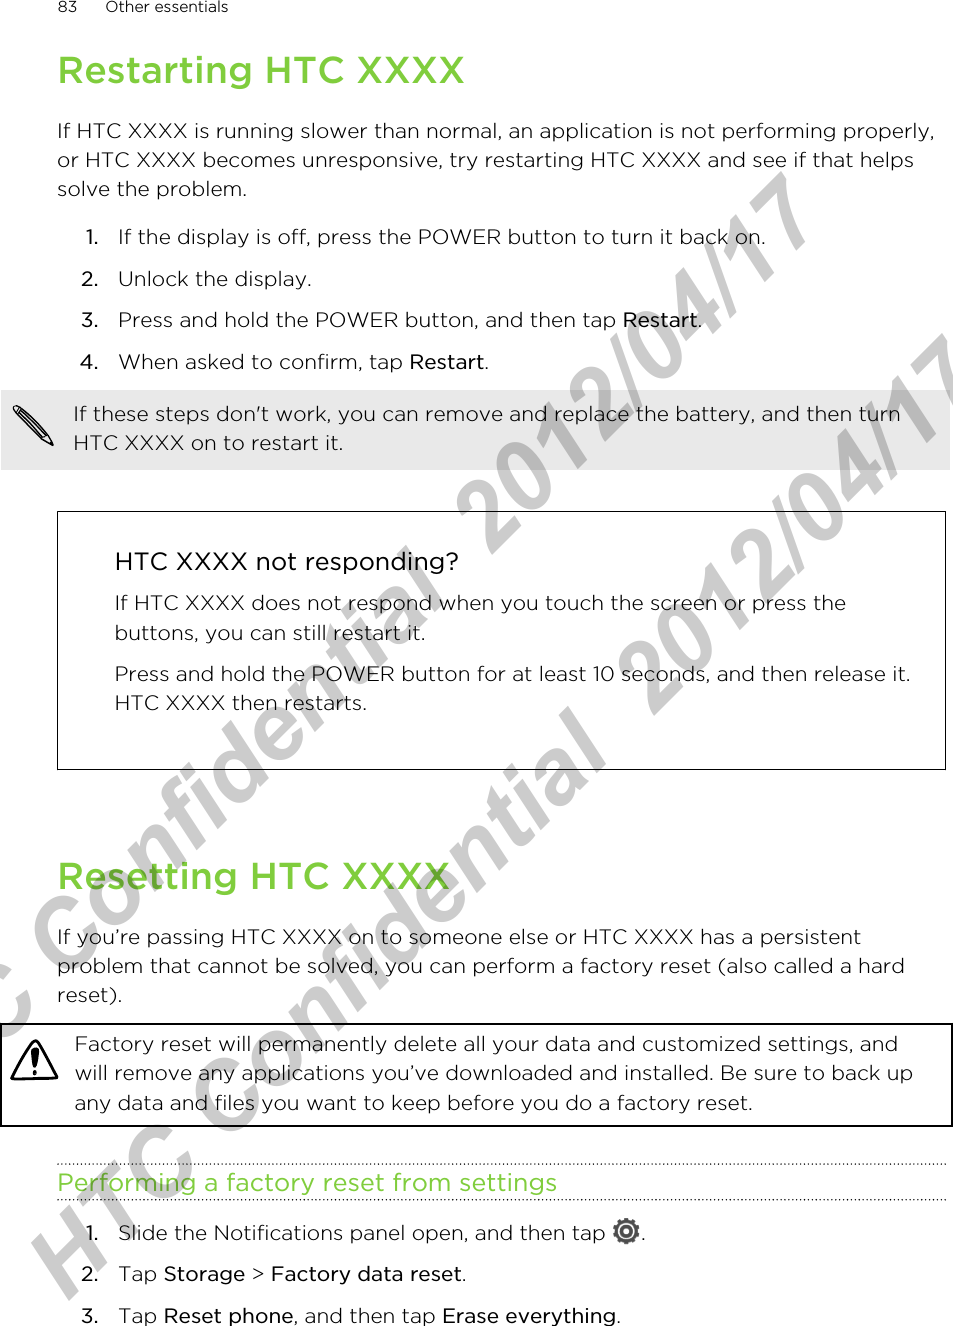 Restarting HTC XXXXIf HTC XXXX is running slower than normal, an application is not performing properly,or HTC XXXX becomes unresponsive, try restarting HTC XXXX and see if that helpssolve the problem.1. If the display is off, press the POWER button to turn it back on.2. Unlock the display.3. Press and hold the POWER button, and then tap Restart.4. When asked to confirm, tap Restart. If these steps don&apos;t work, you can remove and replace the battery, and then turnHTC XXXX on to restart it.HTC XXXX not responding?If HTC XXXX does not respond when you touch the screen or press thebuttons, you can still restart it.Press and hold the POWER button for at least 10 seconds, and then release it.HTC XXXX then restarts.Resetting HTC XXXXIf you’re passing HTC XXXX on to someone else or HTC XXXX has a persistentproblem that cannot be solved, you can perform a factory reset (also called a hardreset).Factory reset will permanently delete all your data and customized settings, andwill remove any applications you’ve downloaded and installed. Be sure to back upany data and files you want to keep before you do a factory reset.Performing a factory reset from settings1. Slide the Notifications panel open, and then tap  .2. Tap Storage &gt; Factory data reset.3. Tap Reset phone, and then tap Erase everything.83 Other essentialsHTC Confidential  2012/04/17  HTC Confidential  2012/04/17 